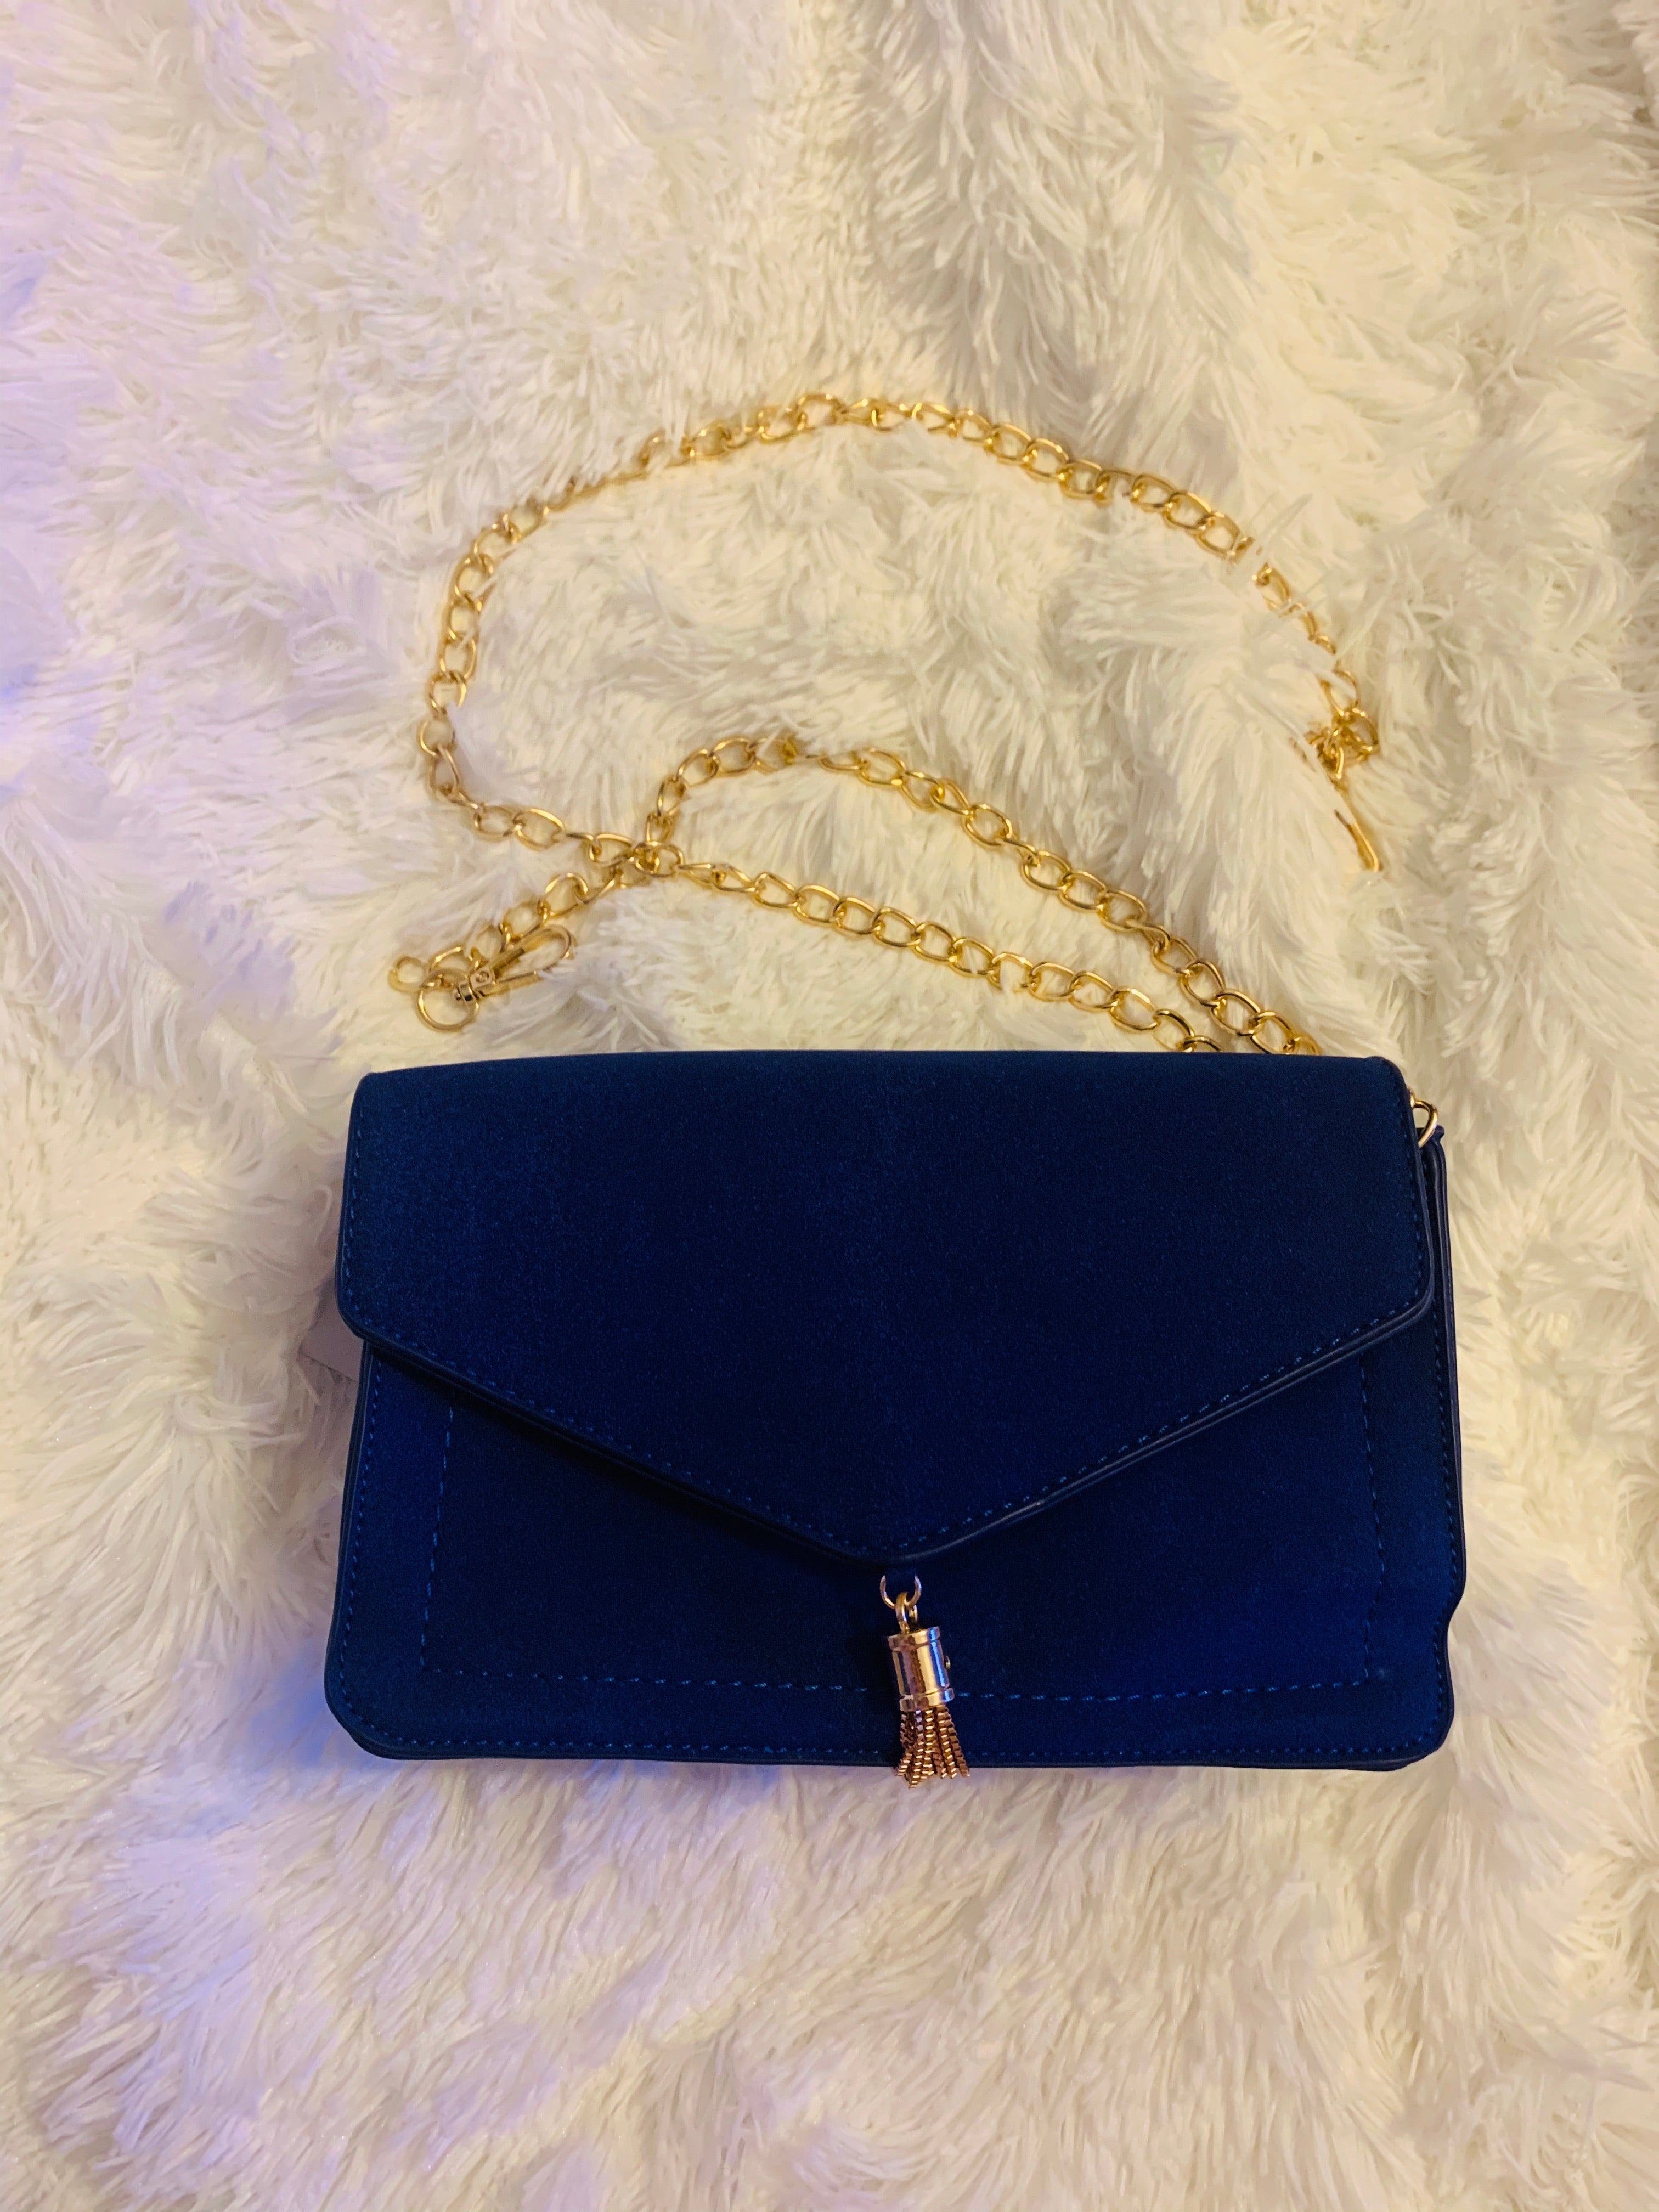 Vegan Leather Small Crossbody Bag or Wristlet Clutch Purse, Includes  Adjustable Shoulder and Wrist Straps by Humble Chic NY, Royal Blue, Cobalt  - Walmart.com